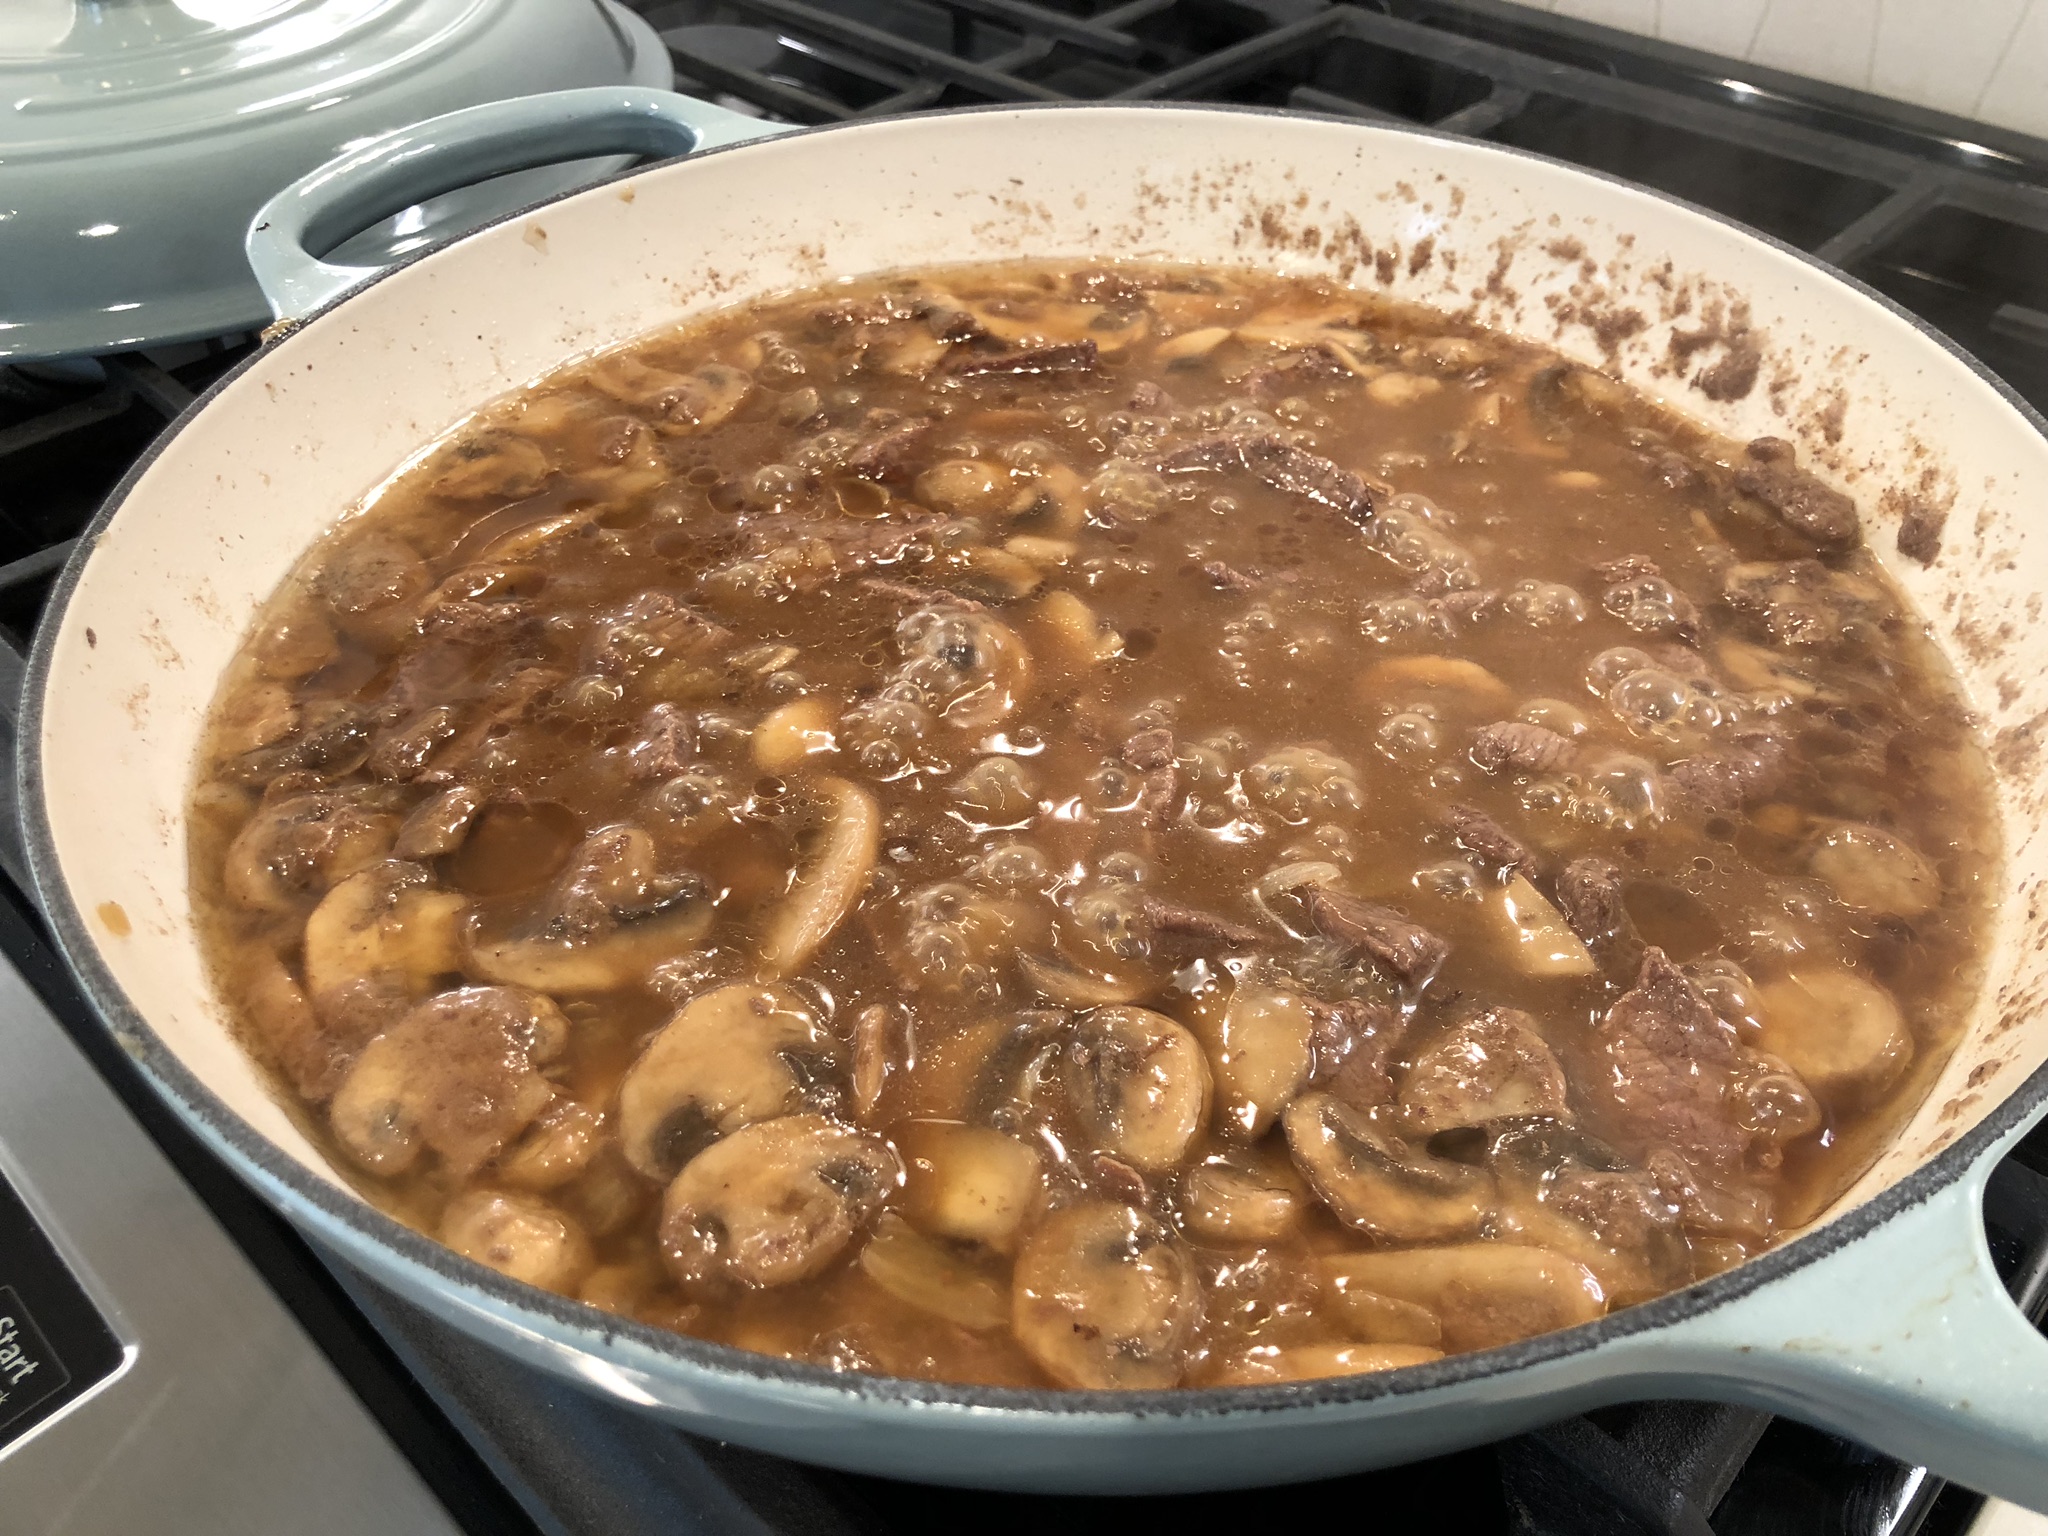 The Beef Stroganoff After Finished Simmering